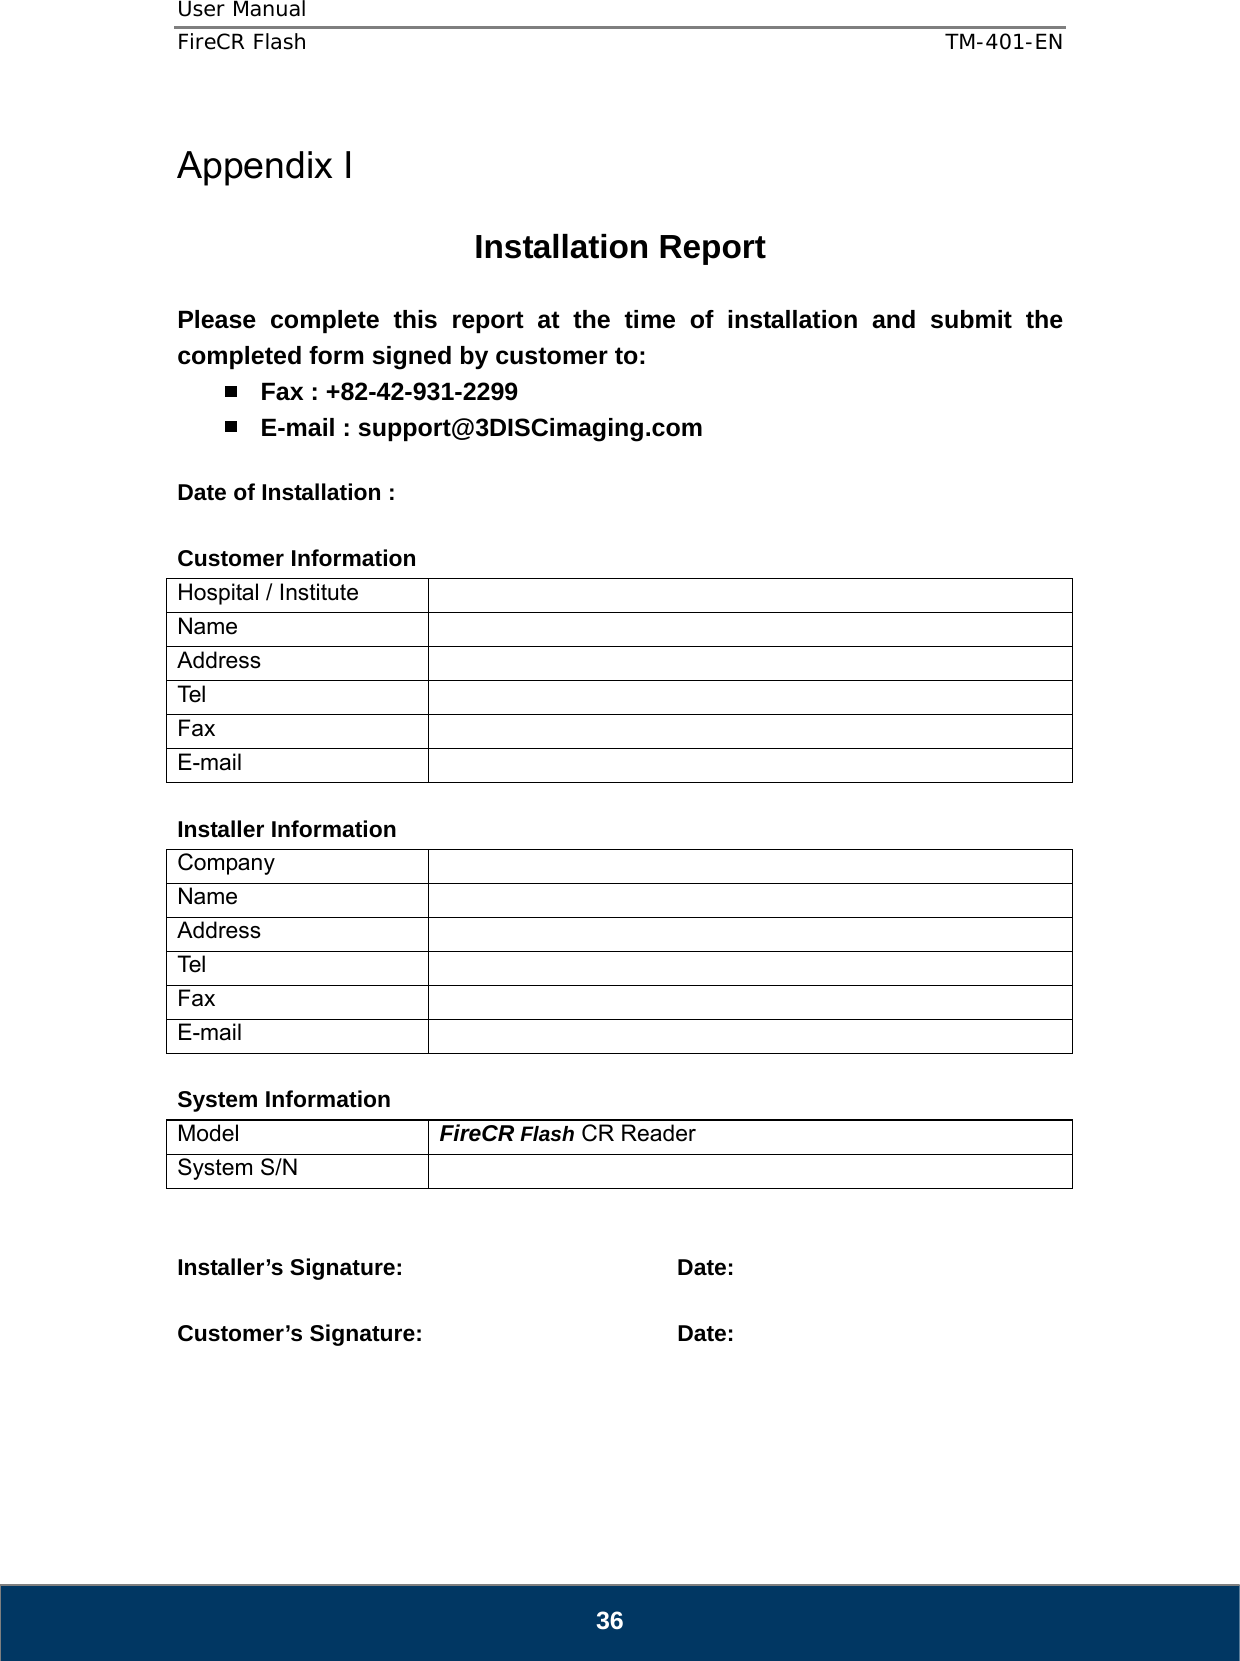 User Manual  FireCR Flash    TM-401-EN   36  Appendix I  Installation Report  Please complete this report at the time of installation and submit the completed form signed by customer to:  Fax : +82-42-931-2299  E-mail : support@3DISCimaging.com  Date of Installation :    Customer Information Hospital / Institute   Name  Address  Tel  Fax  E-mail   Installer Information Company  Name  Address  Tel  Fax  E-mail   System Information Model  FireCR Flash CR Reader System S/N     Installer’s Signature:    Date:  Customer’s Signature:       Date:      